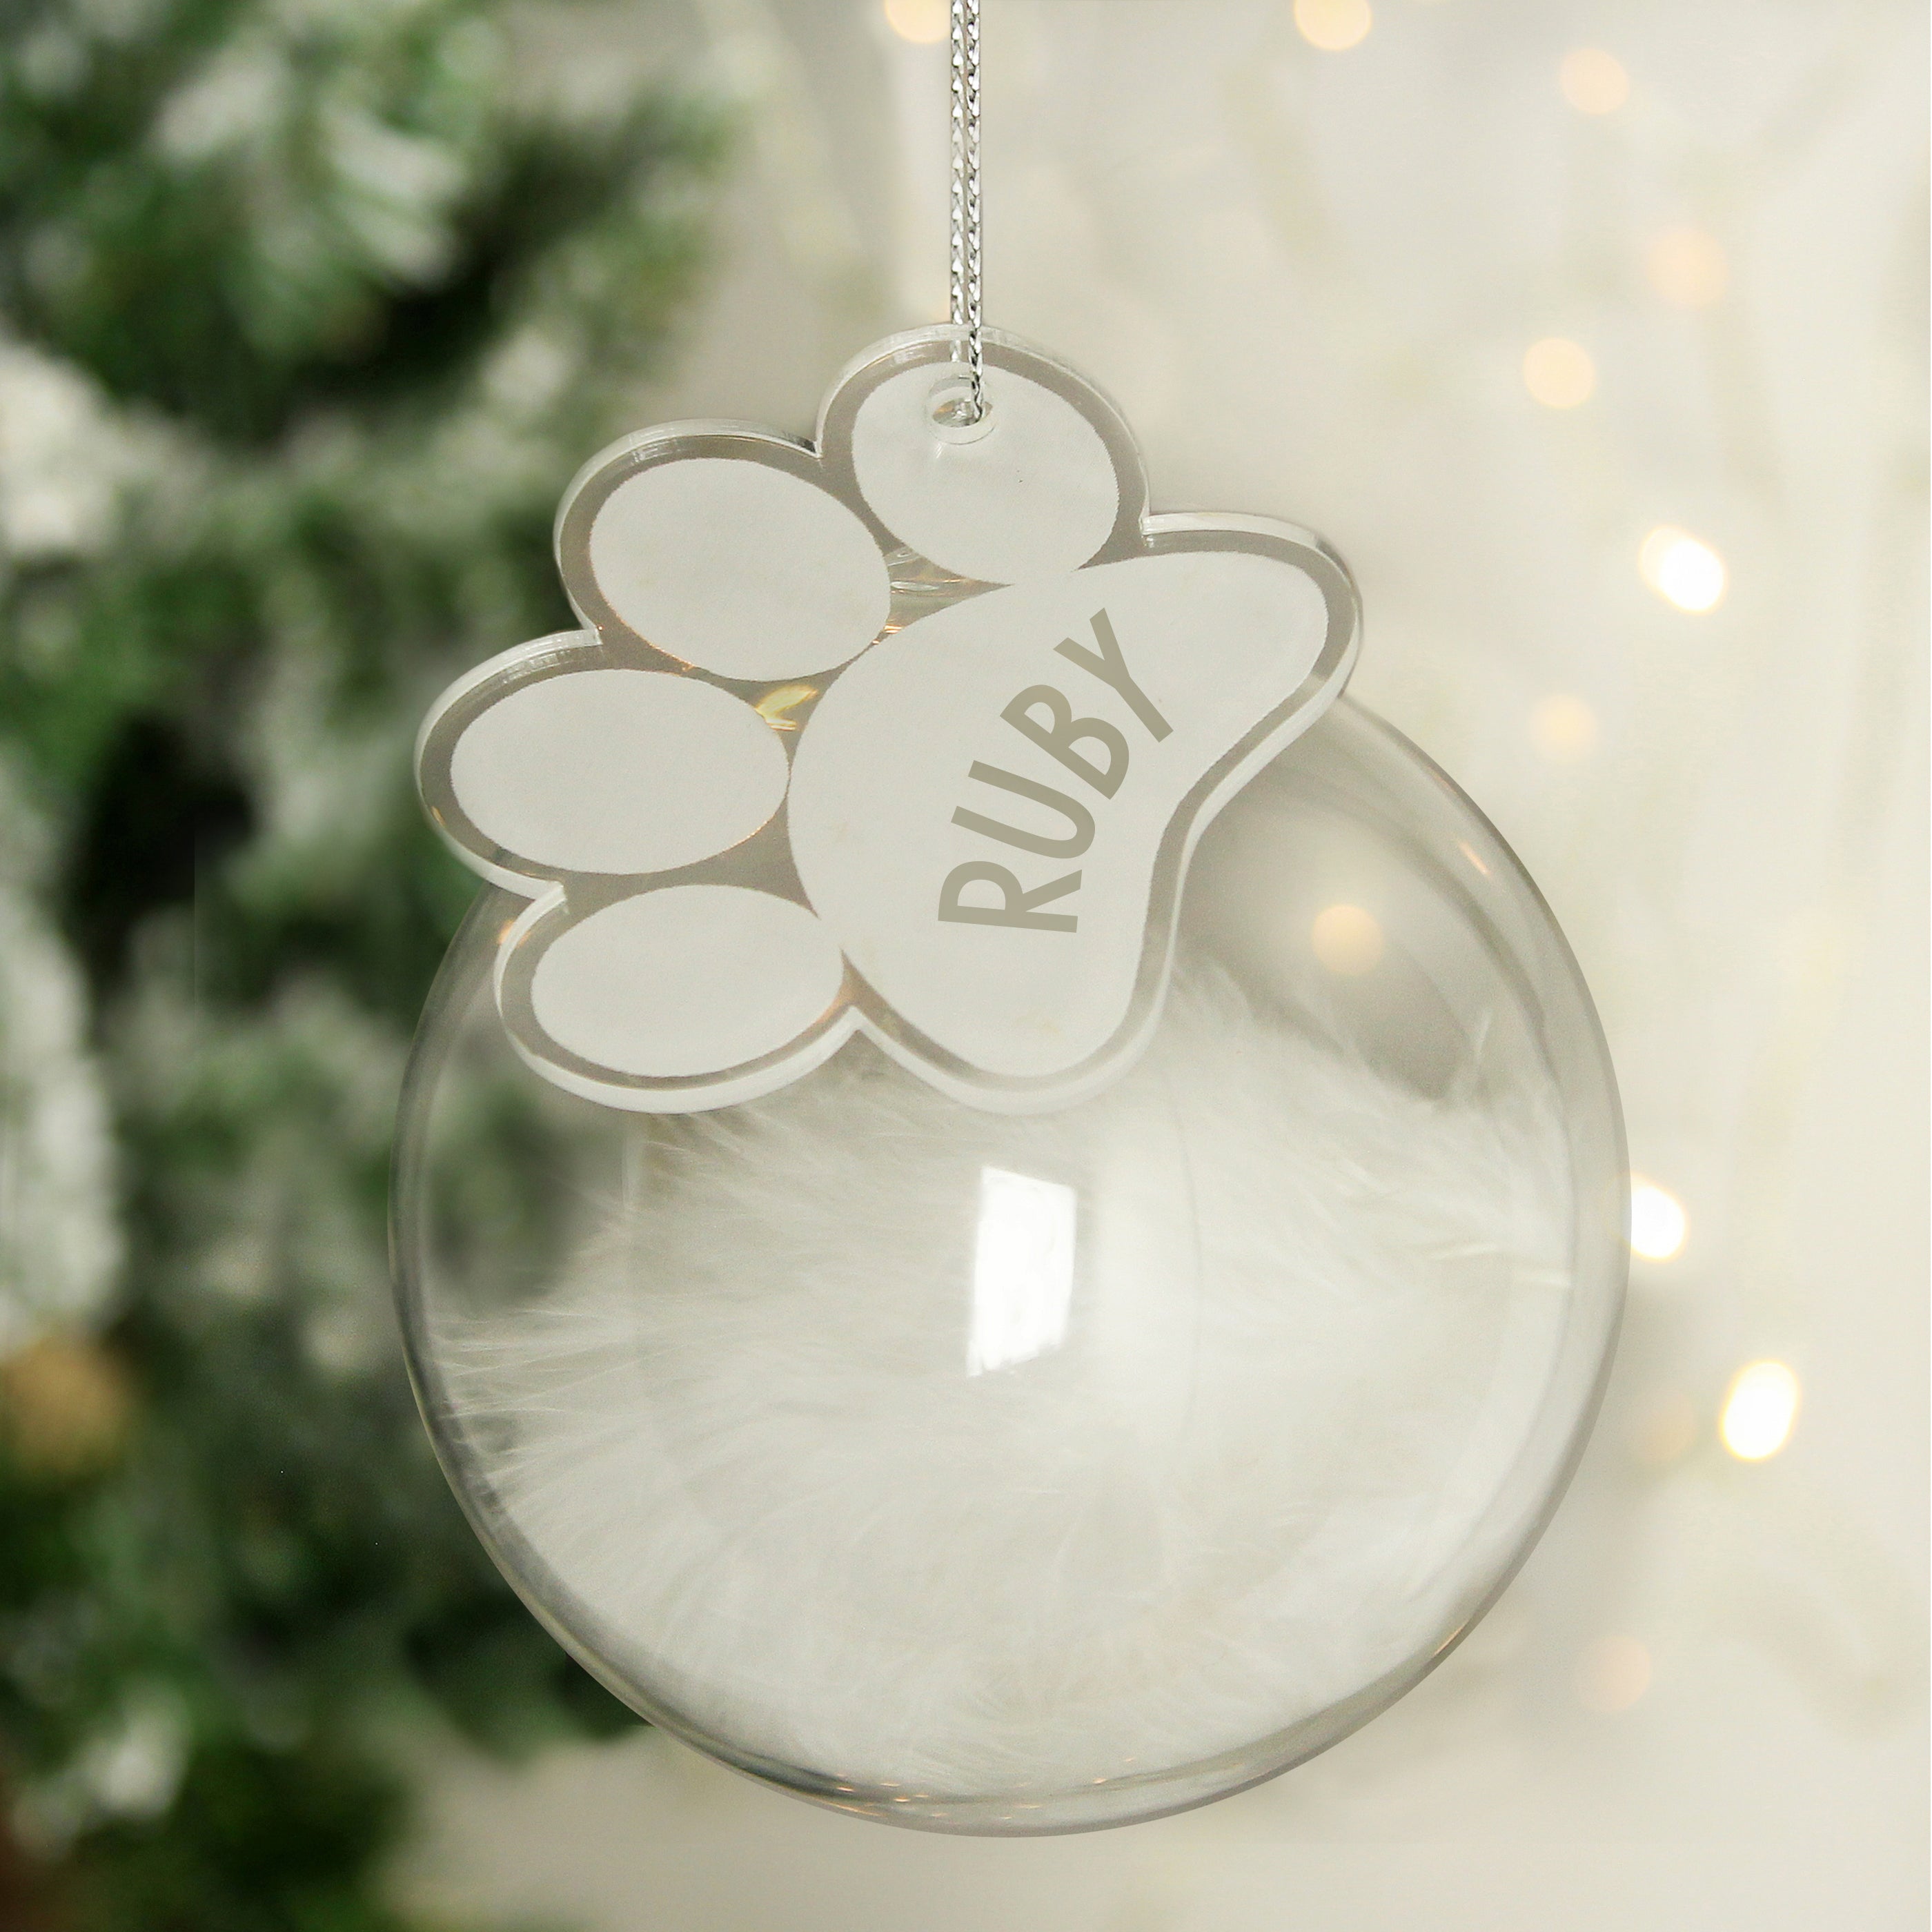 Personalised Pets White Feather Glass Bauble With Paw Print Tag Hanging From A Tree